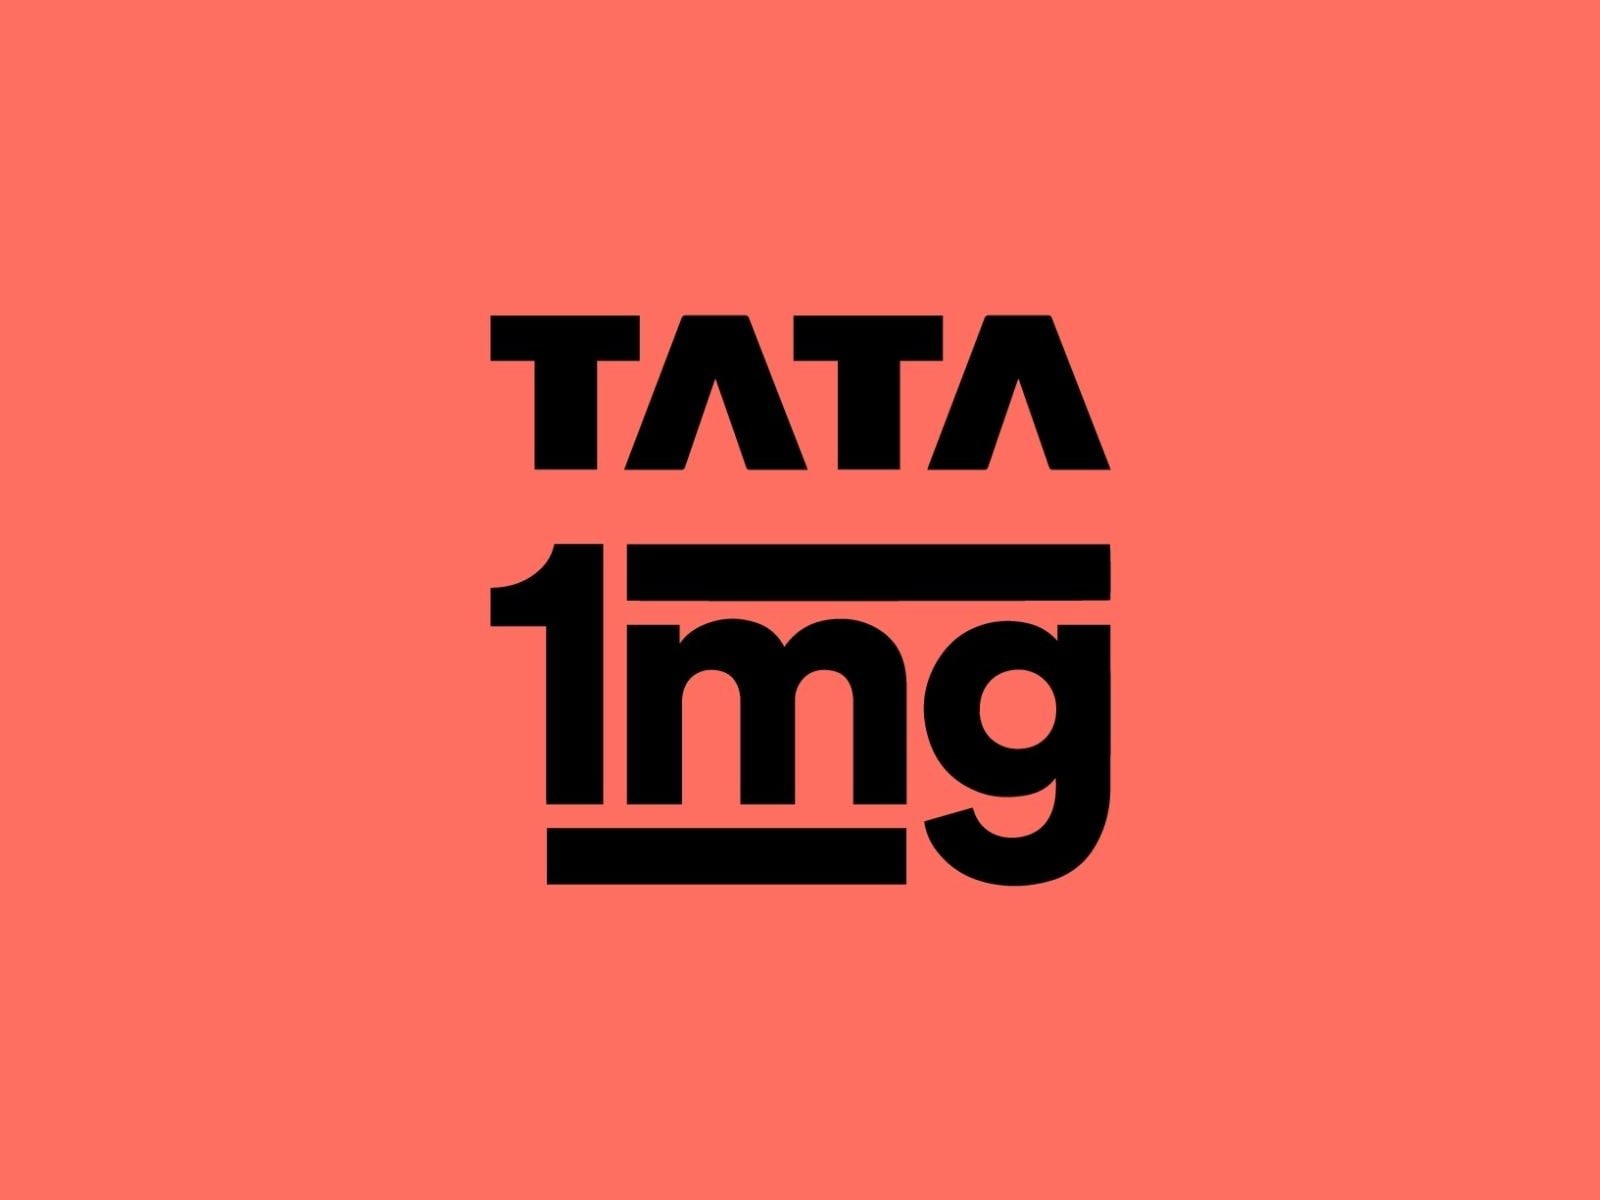 Tata 1mg Becomes Unicorn With $40 Million Funding Led by Tata Digital; Know  Company's Value - News18